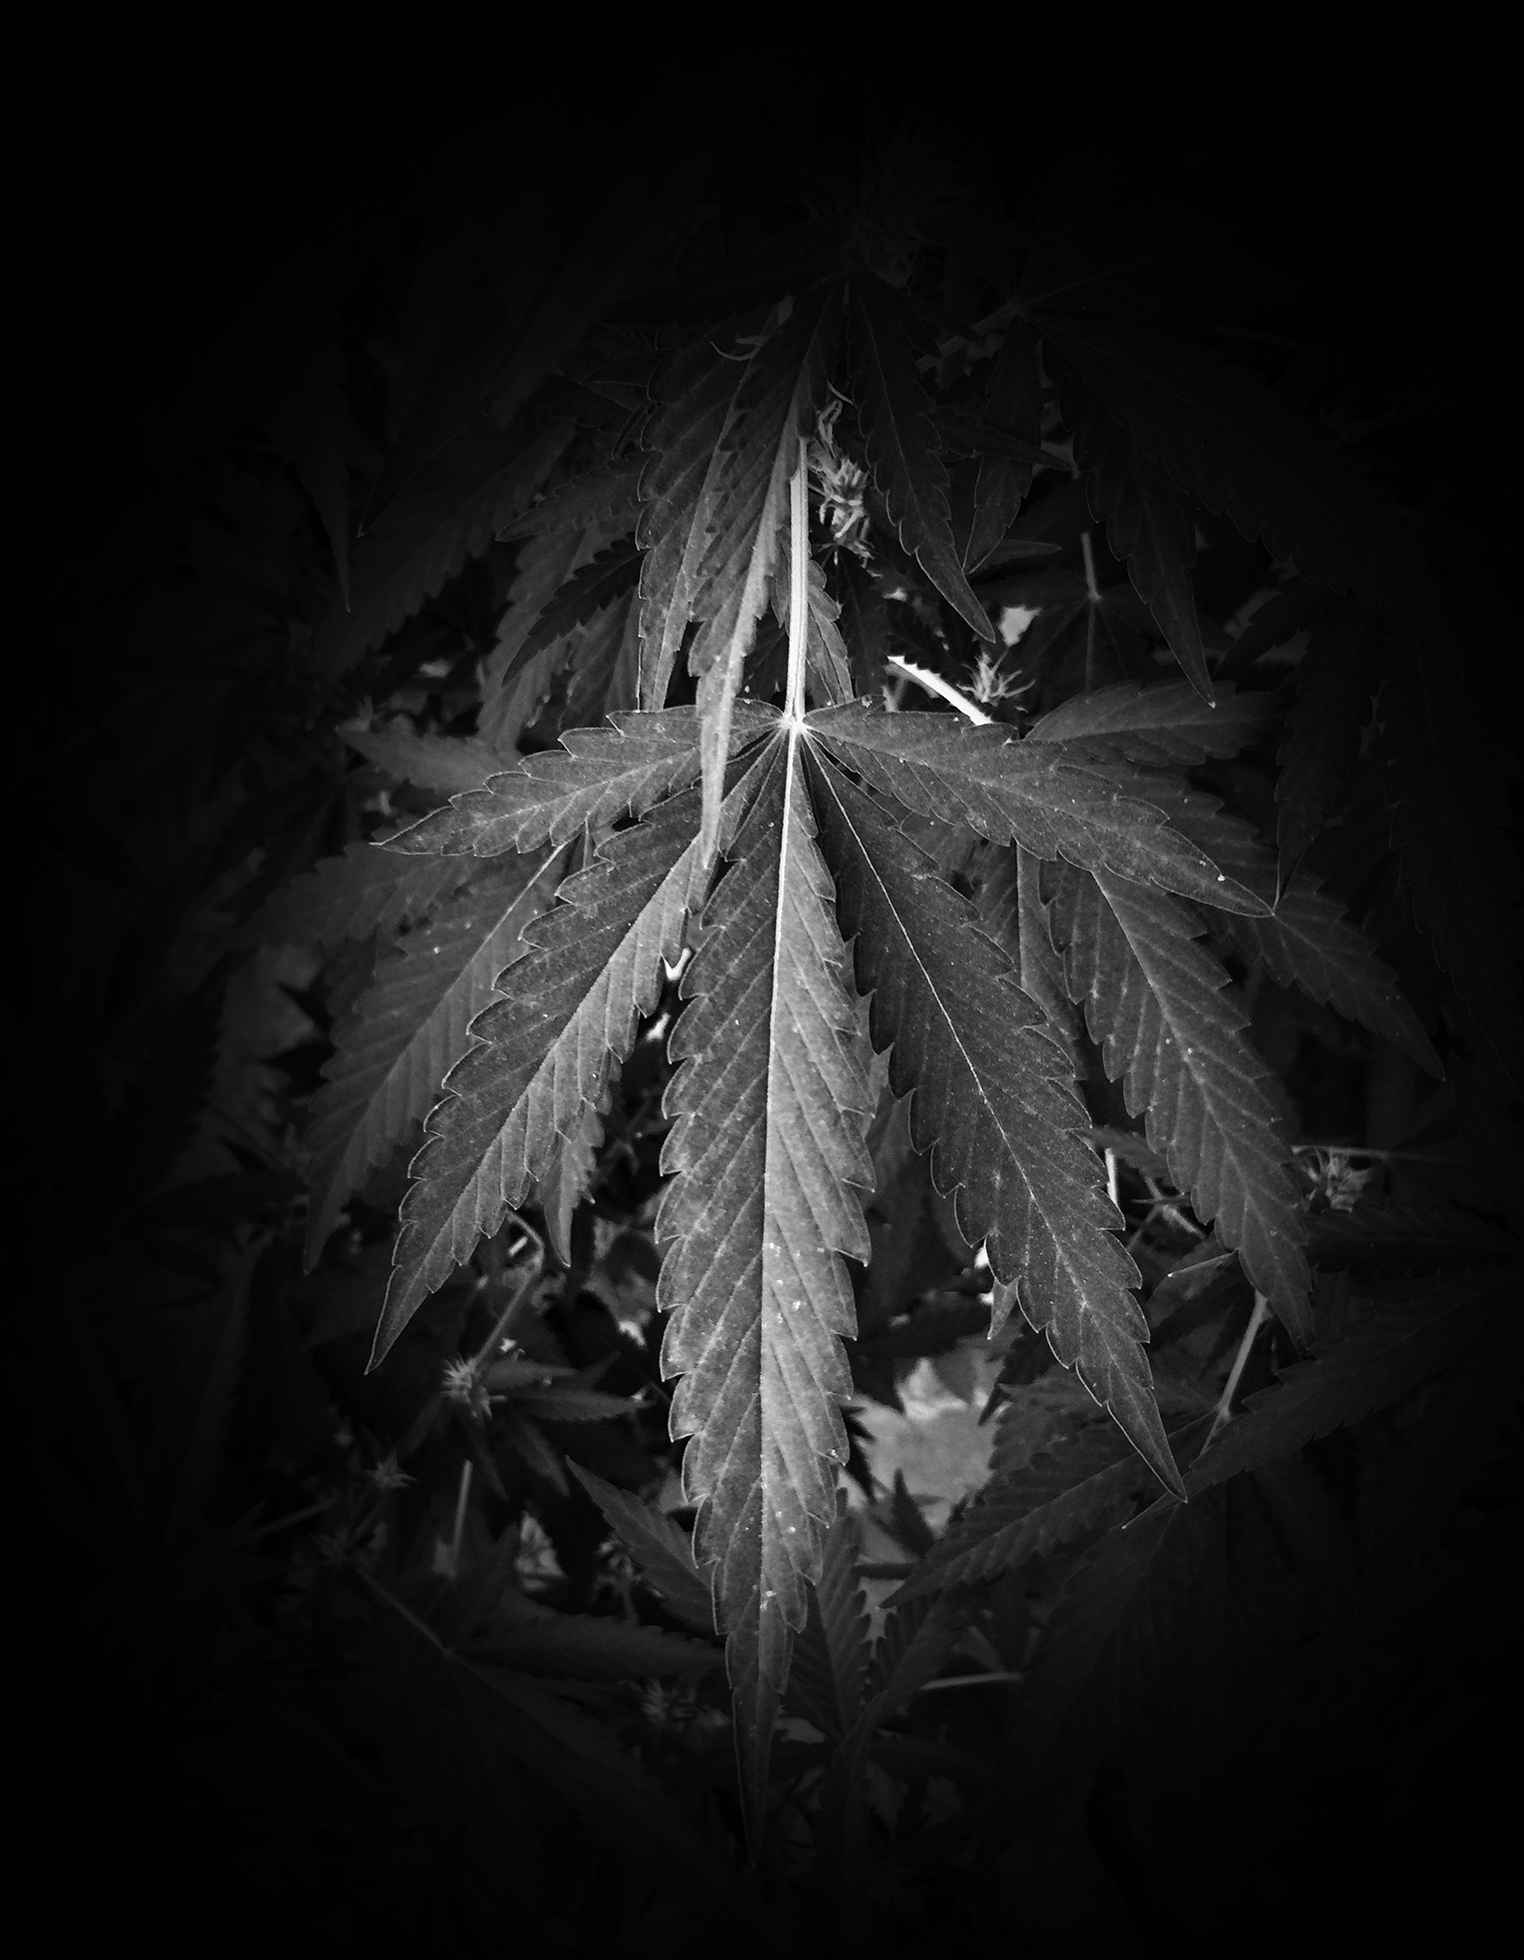 A close-up of a marijuana leaf. The rest of the background is blacked out by a dark vignette.